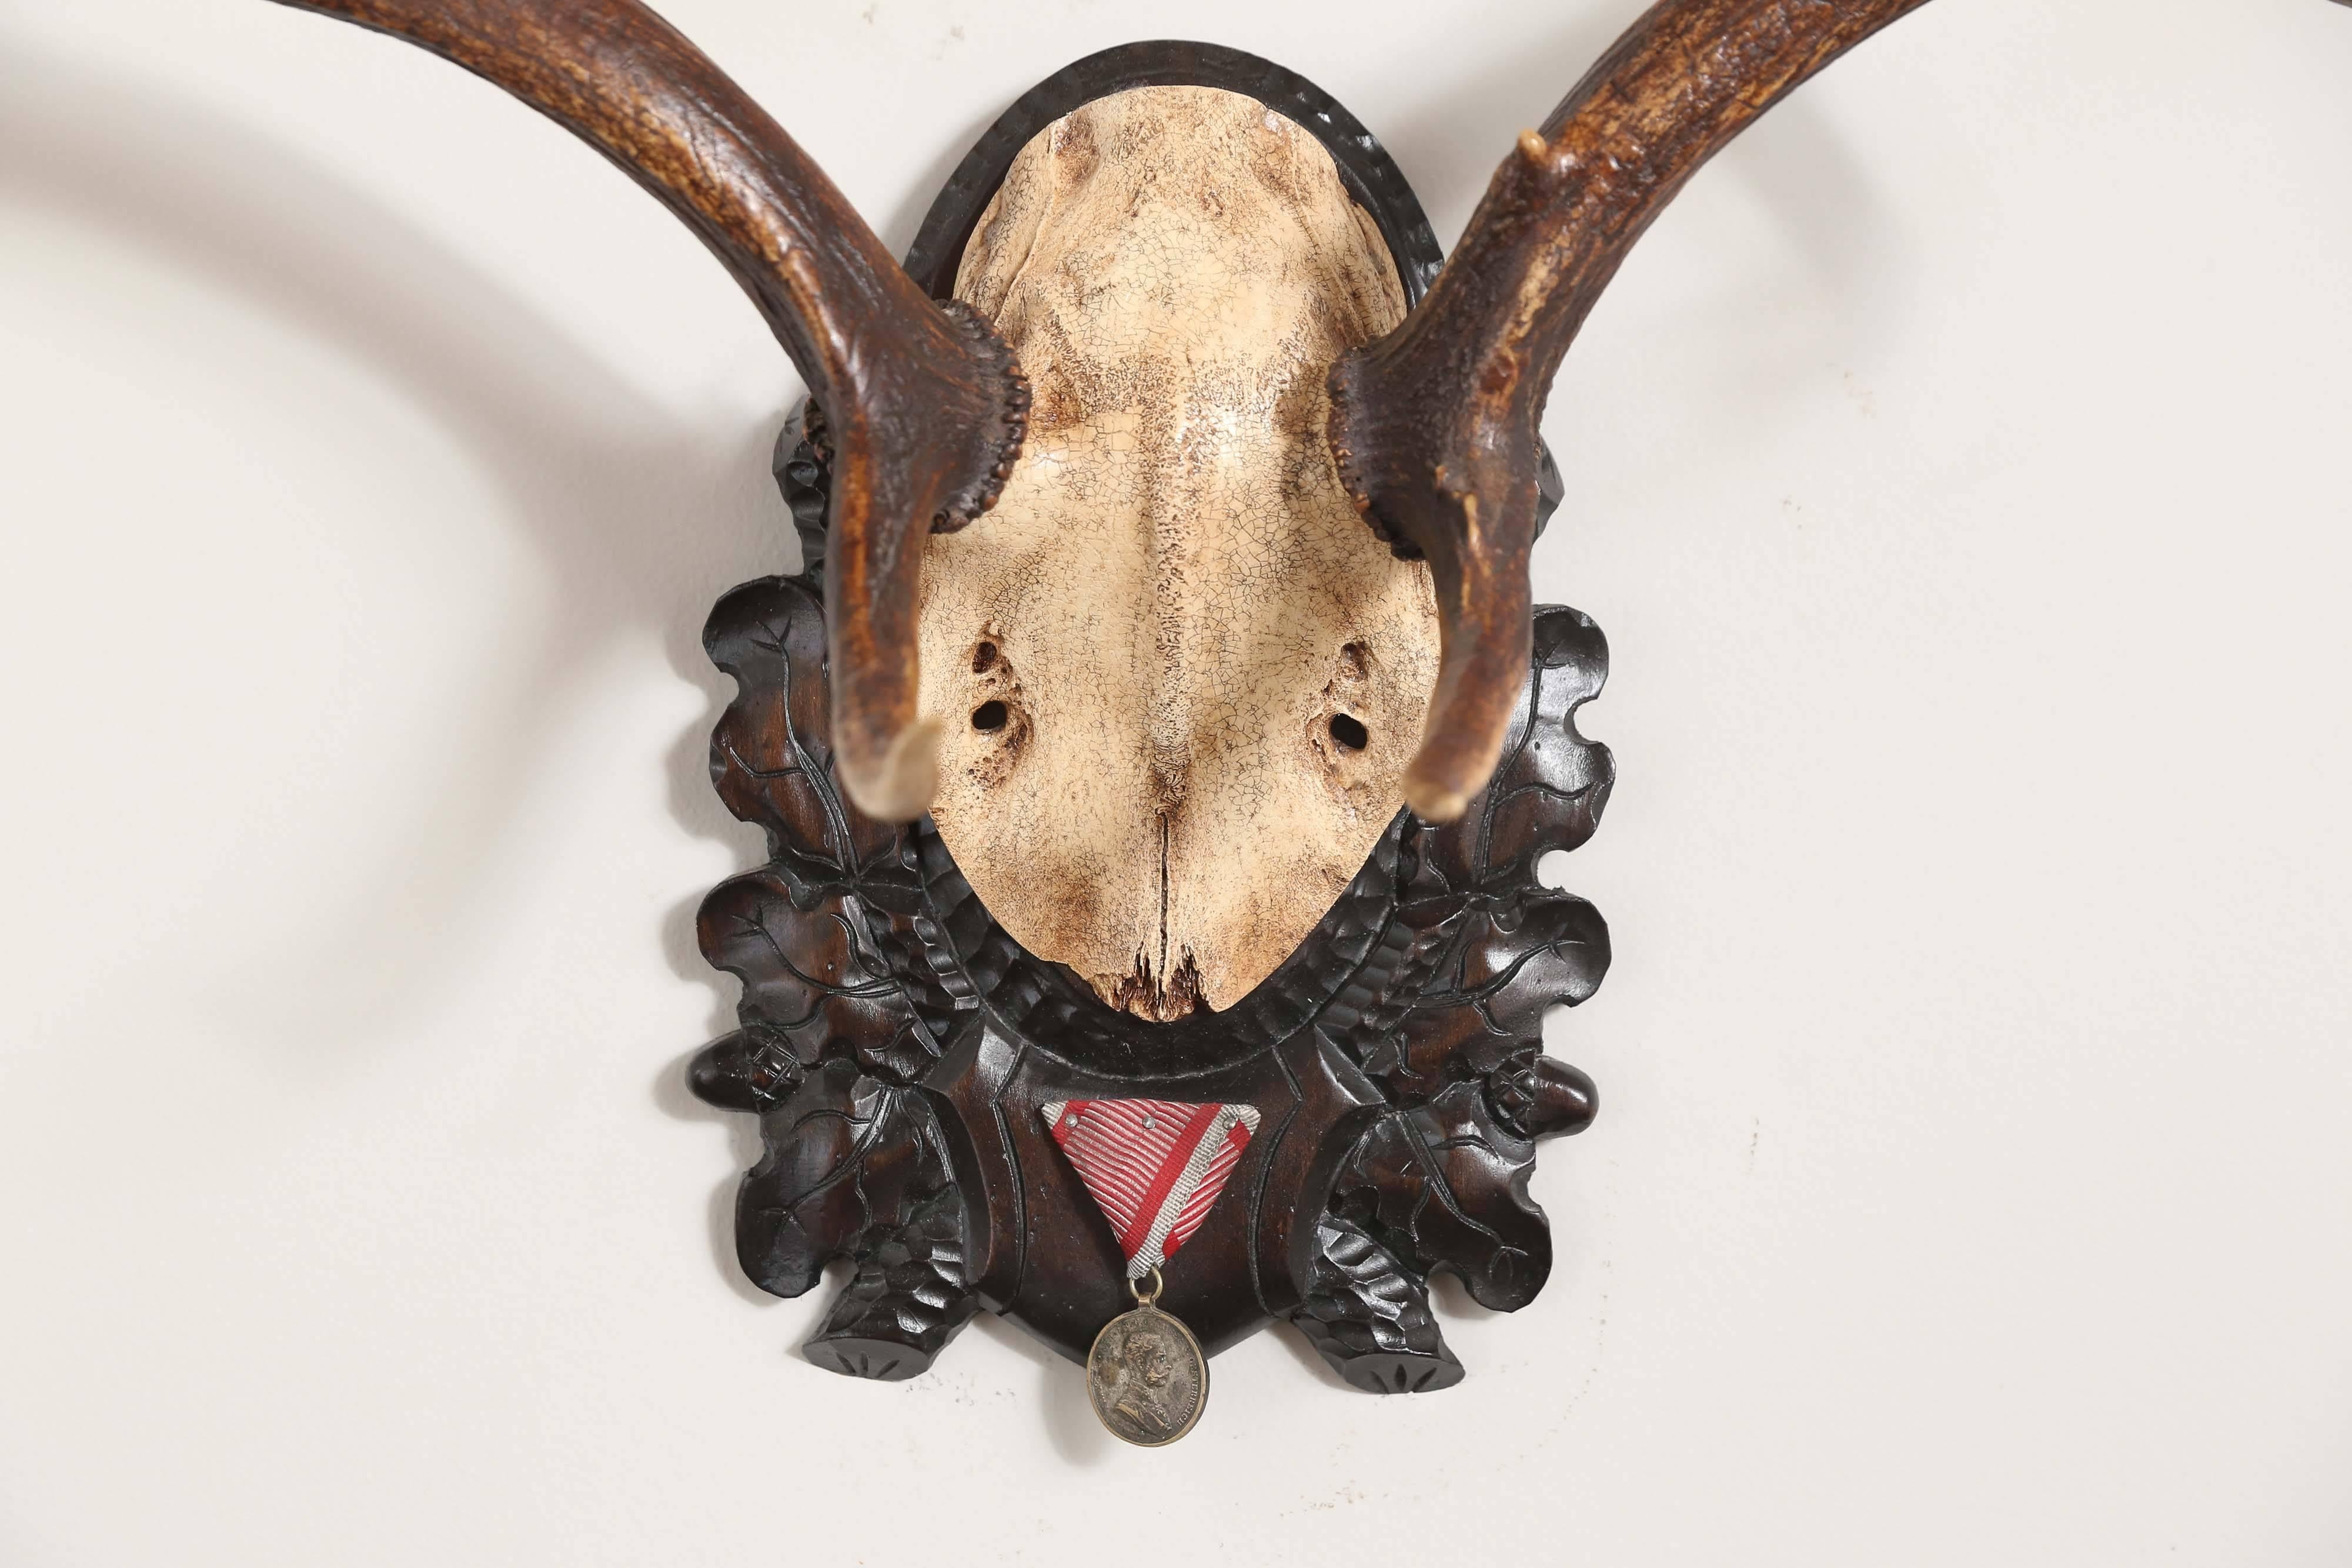 19th century Fallow Deer trophy from Emperor Franz Joseph's castle at Eckartsau in the Southern Austrian Alps, a favorite hunting schloss of the Habsburg Royal family. This historic hunting trophy features the original Black Forest carved plaque and